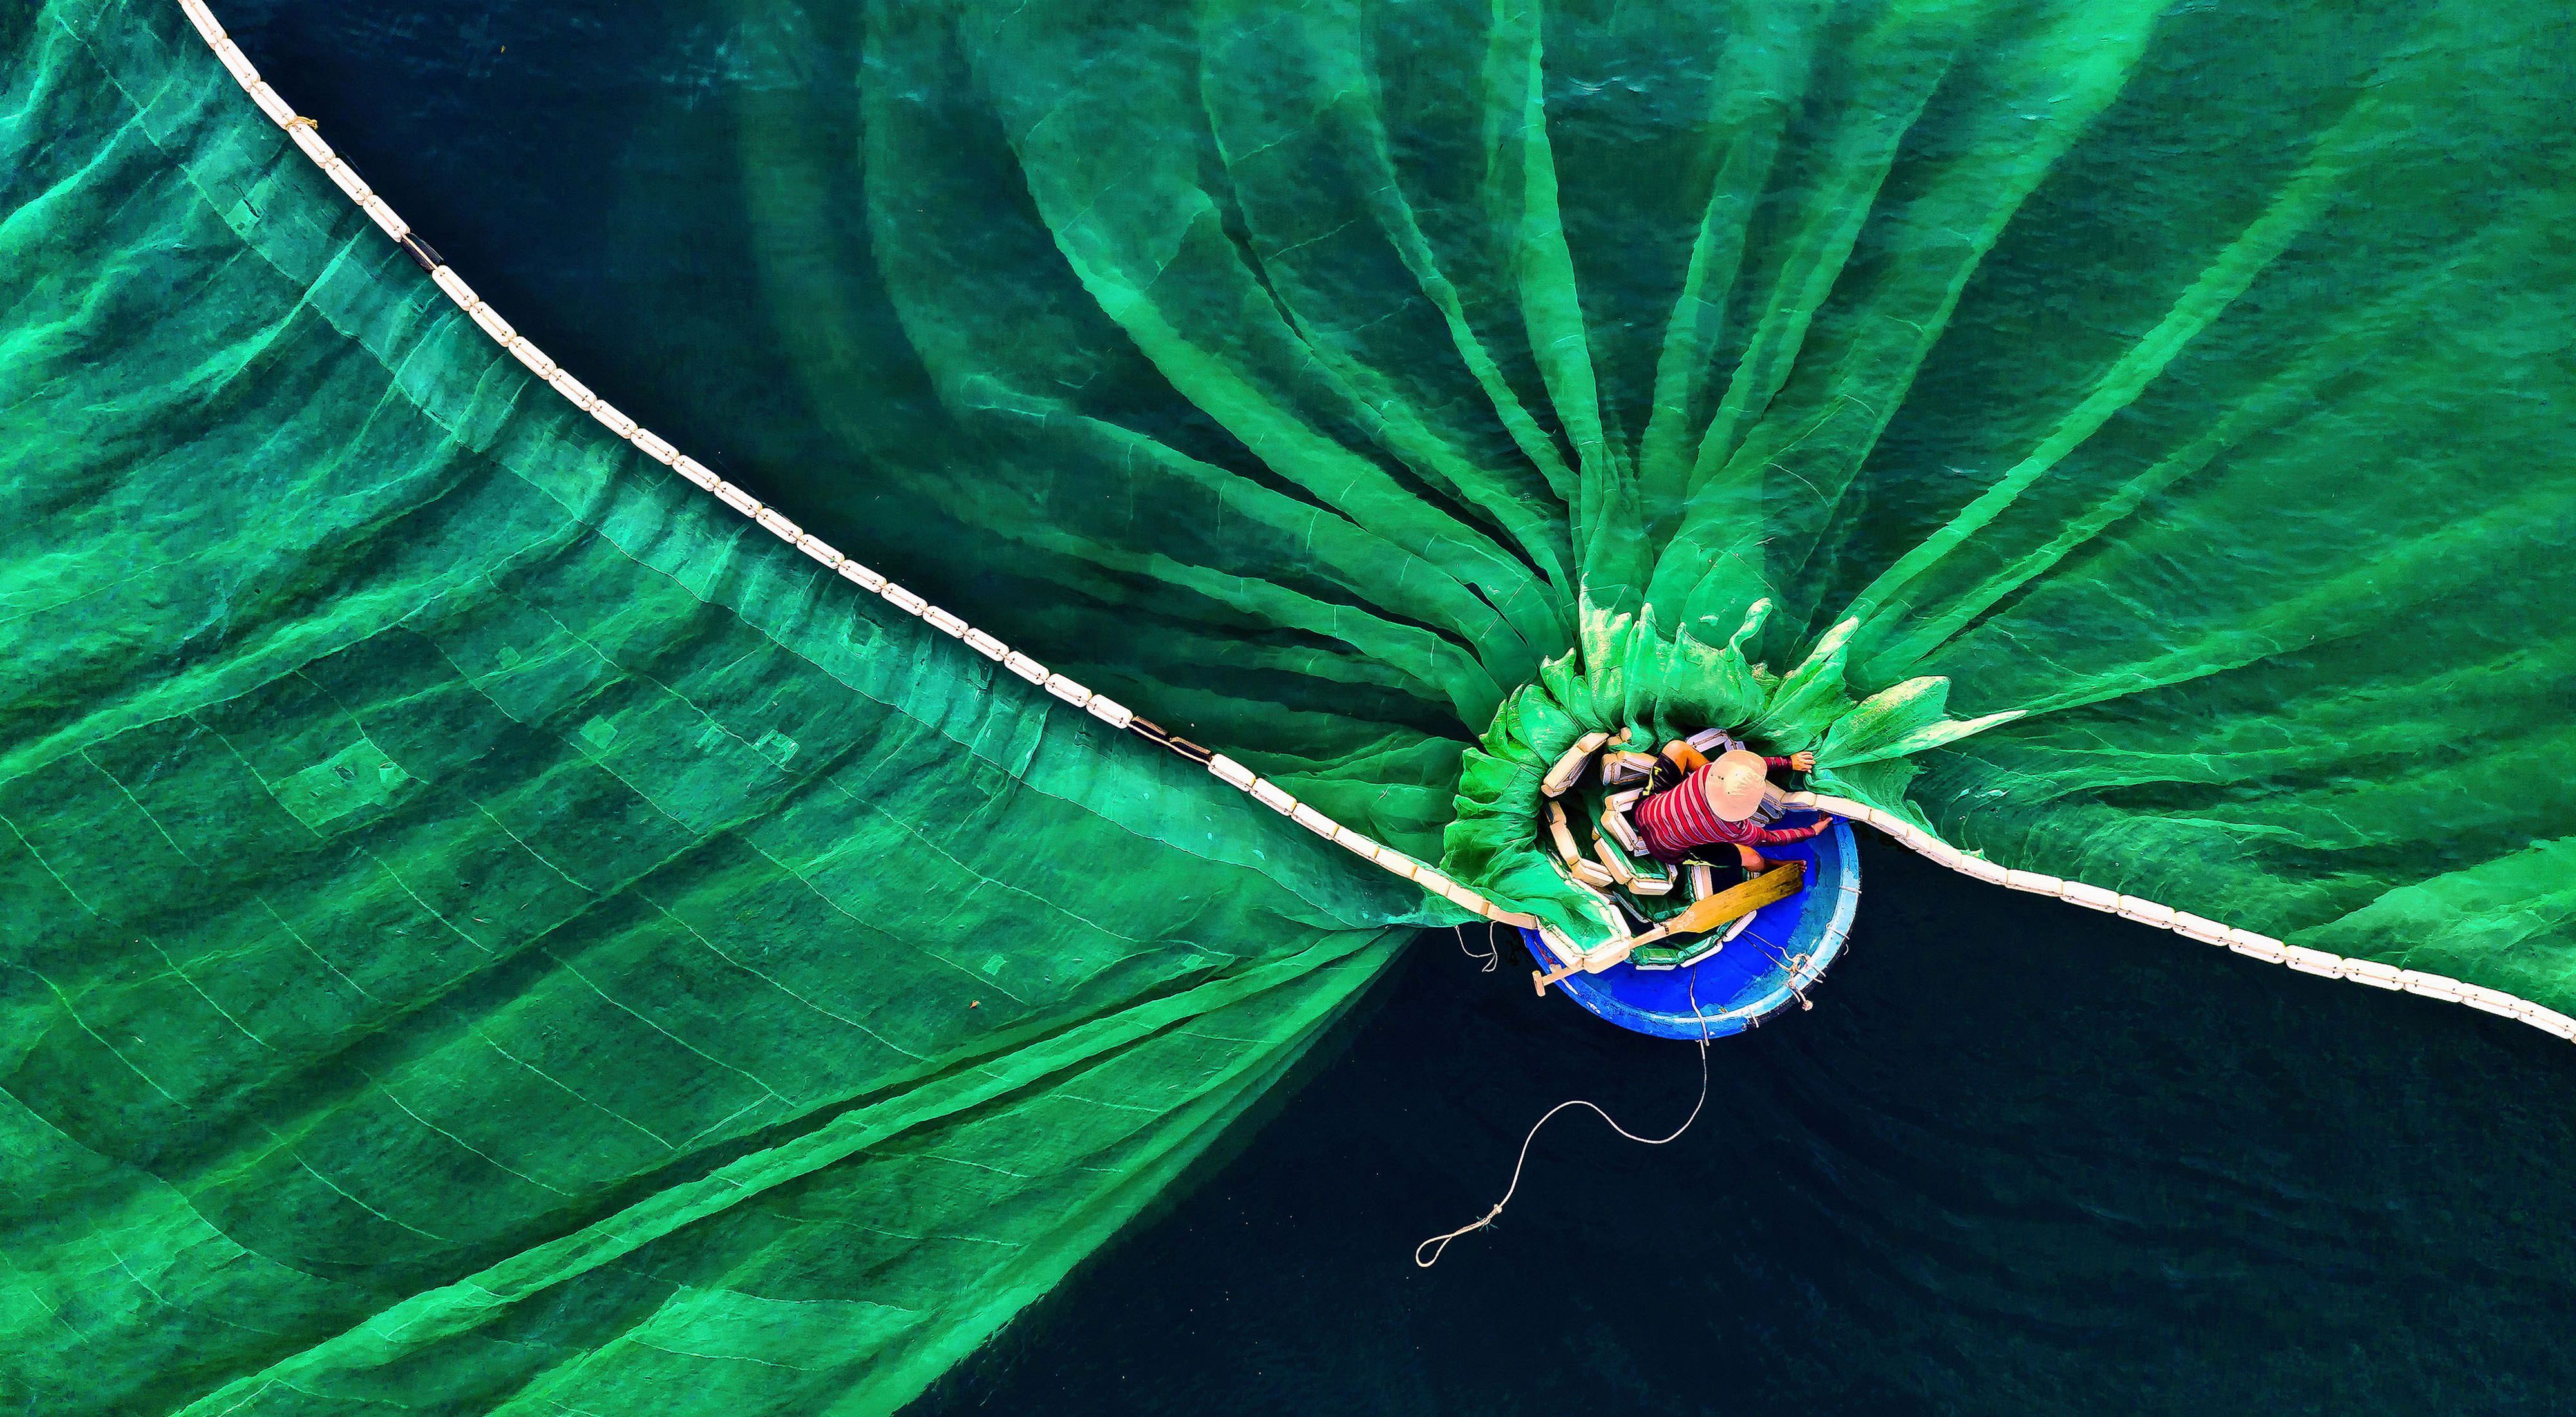 A person in a small circular boat casts a massive fishing net into the water.